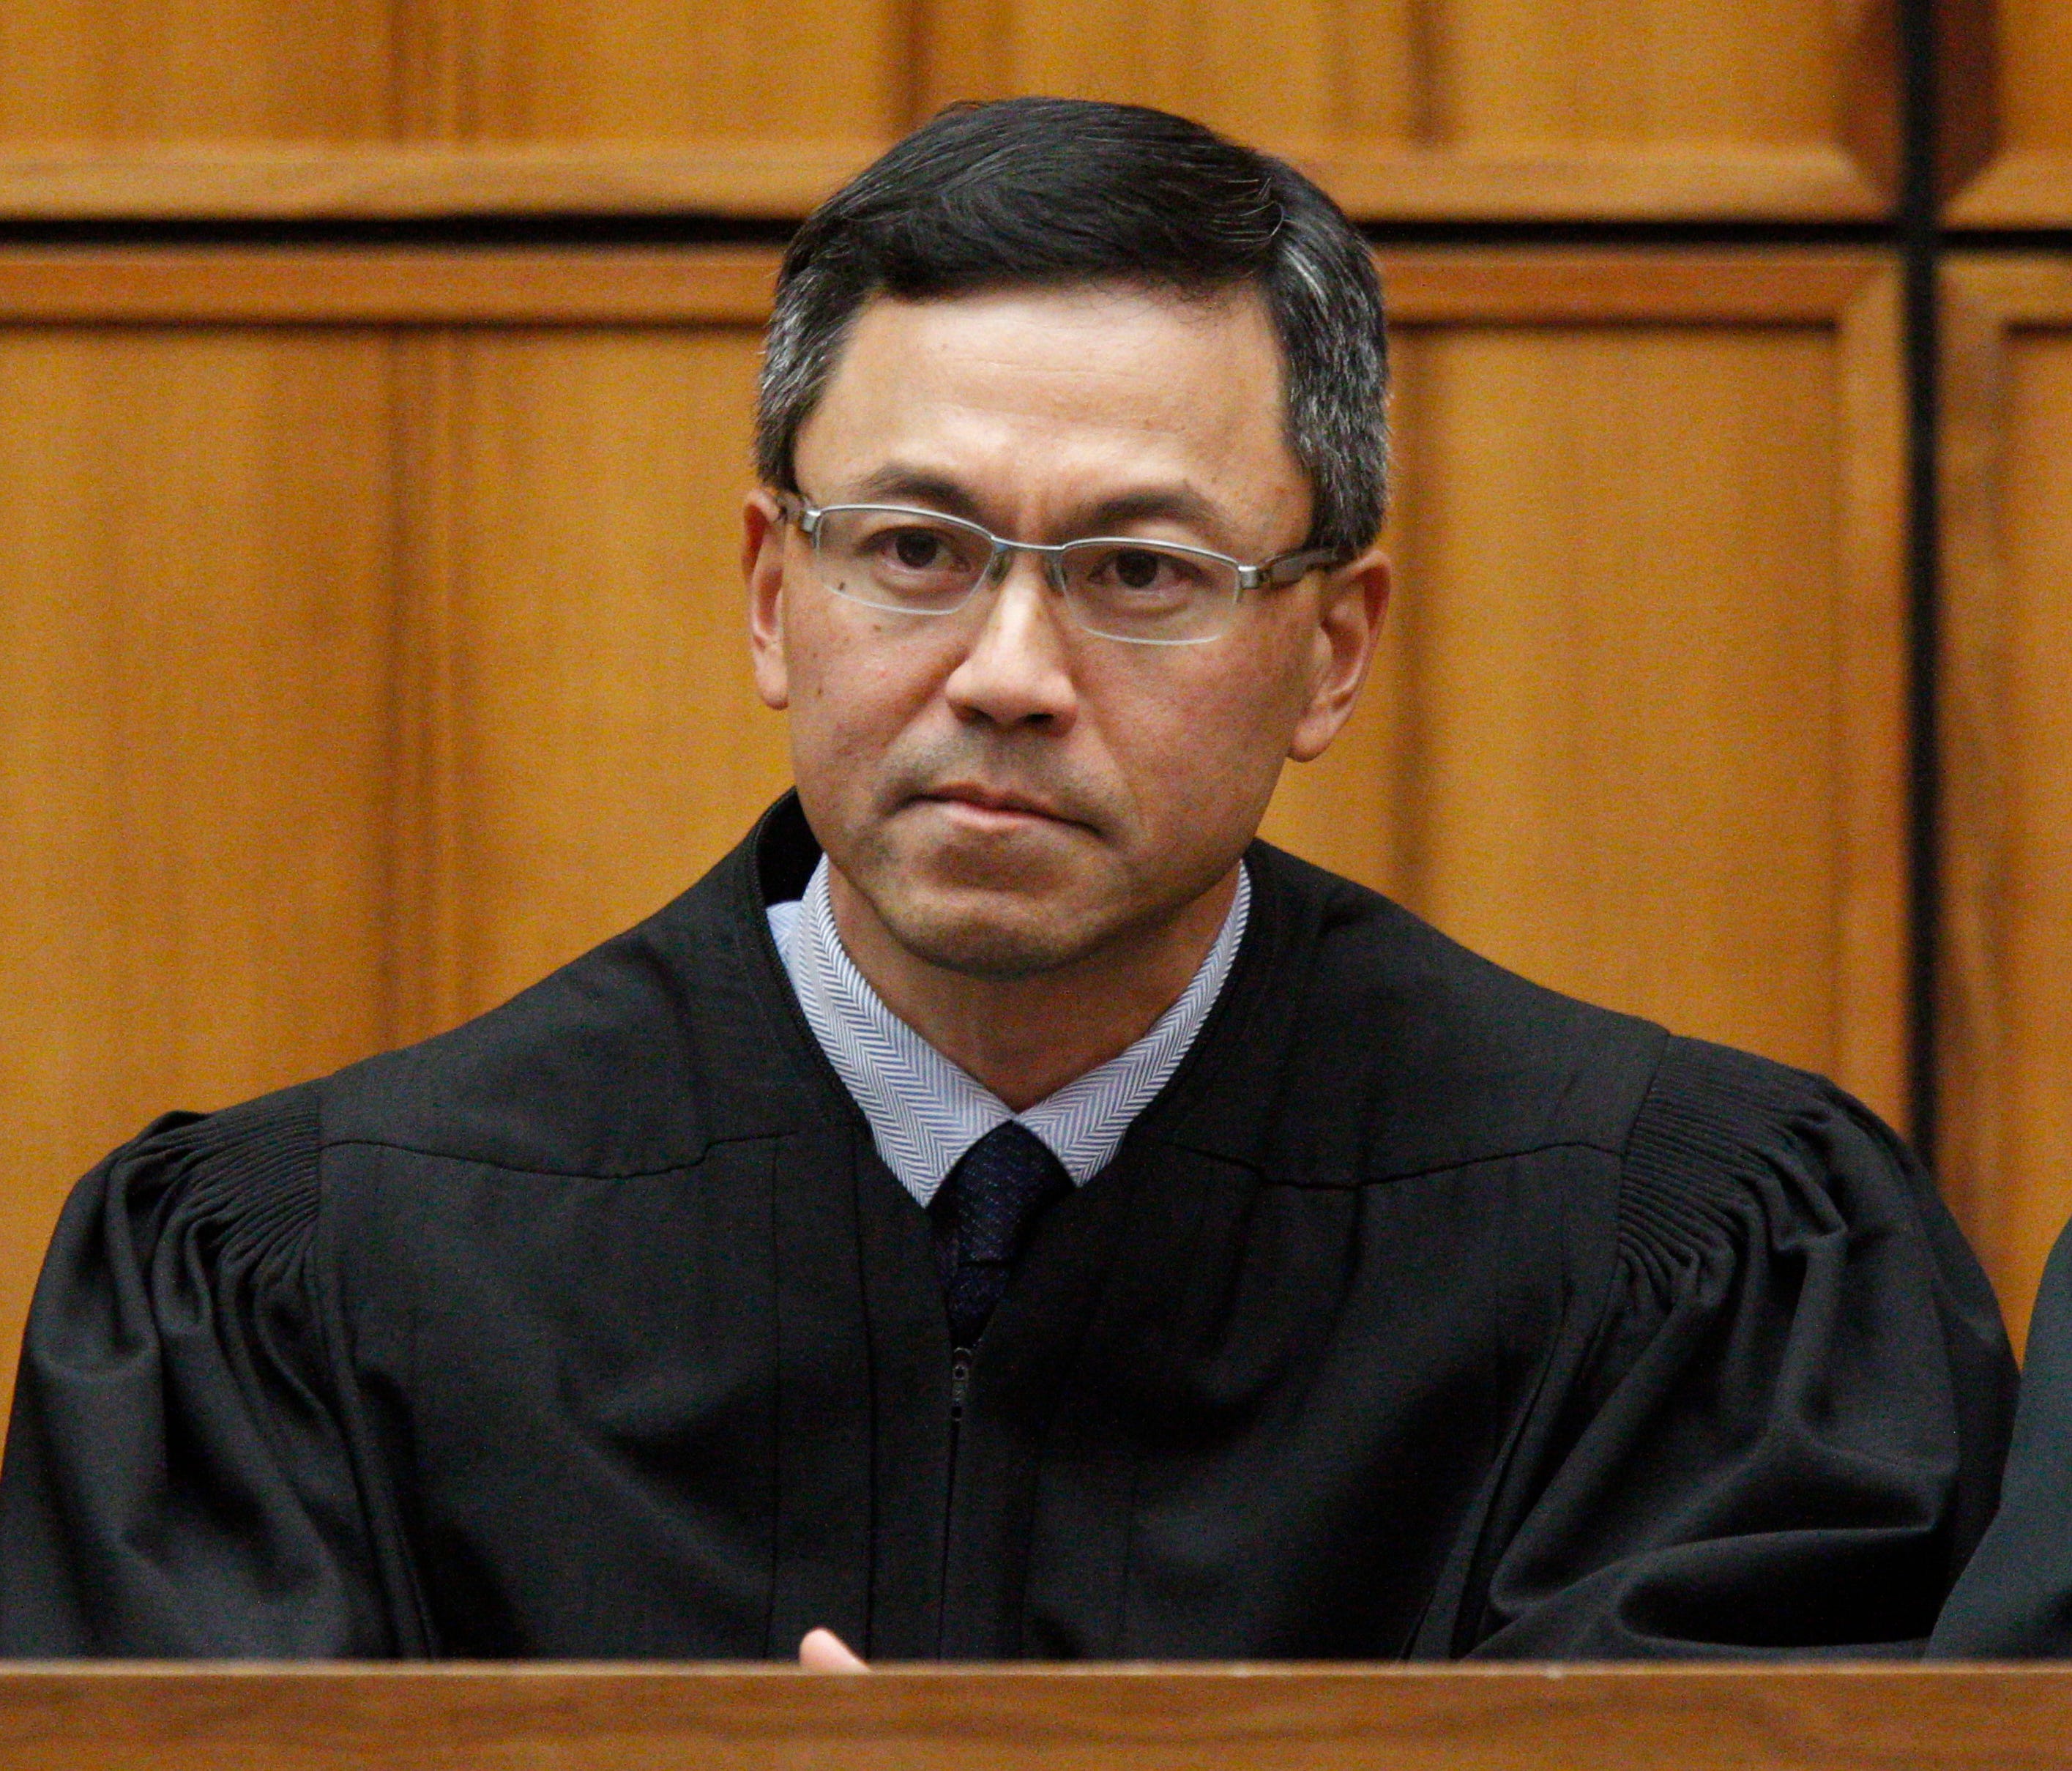 This December 2015 photo shows U.S. District Judge Derrick Watson in Honolulu. The judge blocked President Trump's revised travel ban on March 15, 2017, hour before it was to take effect.